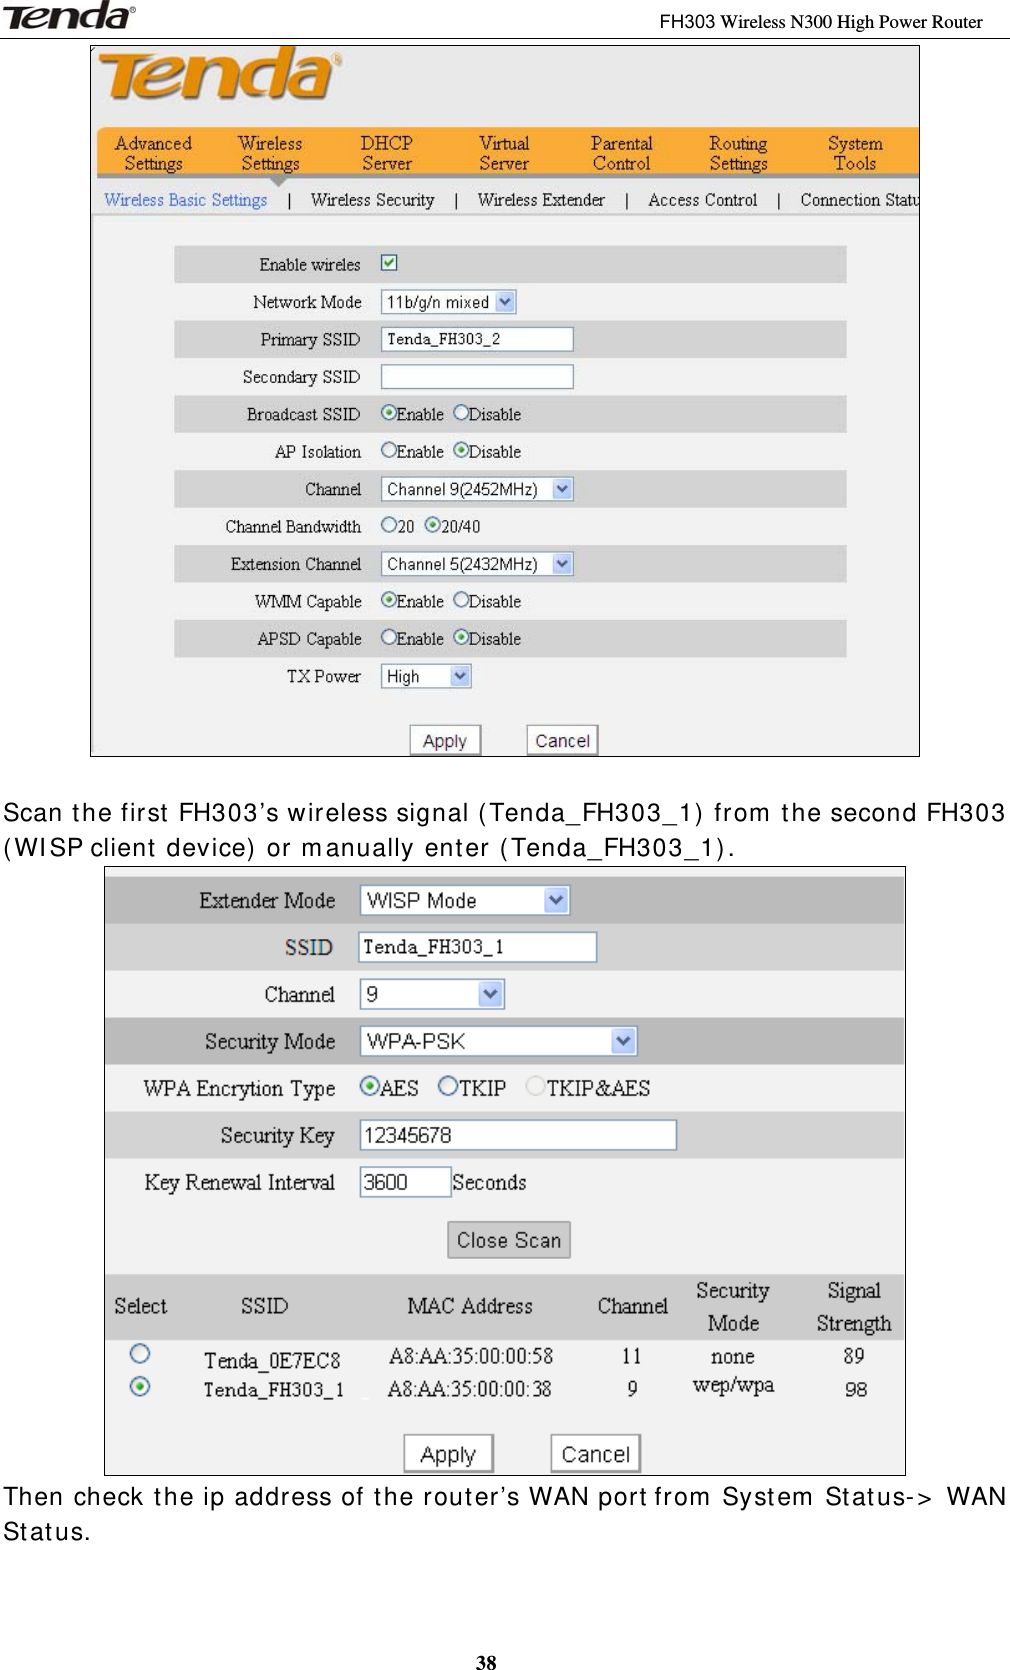 3                                                              FH303 Wireless N300 High Power Router 38   Scan t he first  FH303’s wireless signal ( Tenda_FH303_1)  from  t he second FH303 ( WI SP client  device)  or m anually ent er ( Tenda_FH303_1) .    Then check t he ip address of t he router’s WAN port from  Syst em  Stat us- &gt;  WAN St atus. 